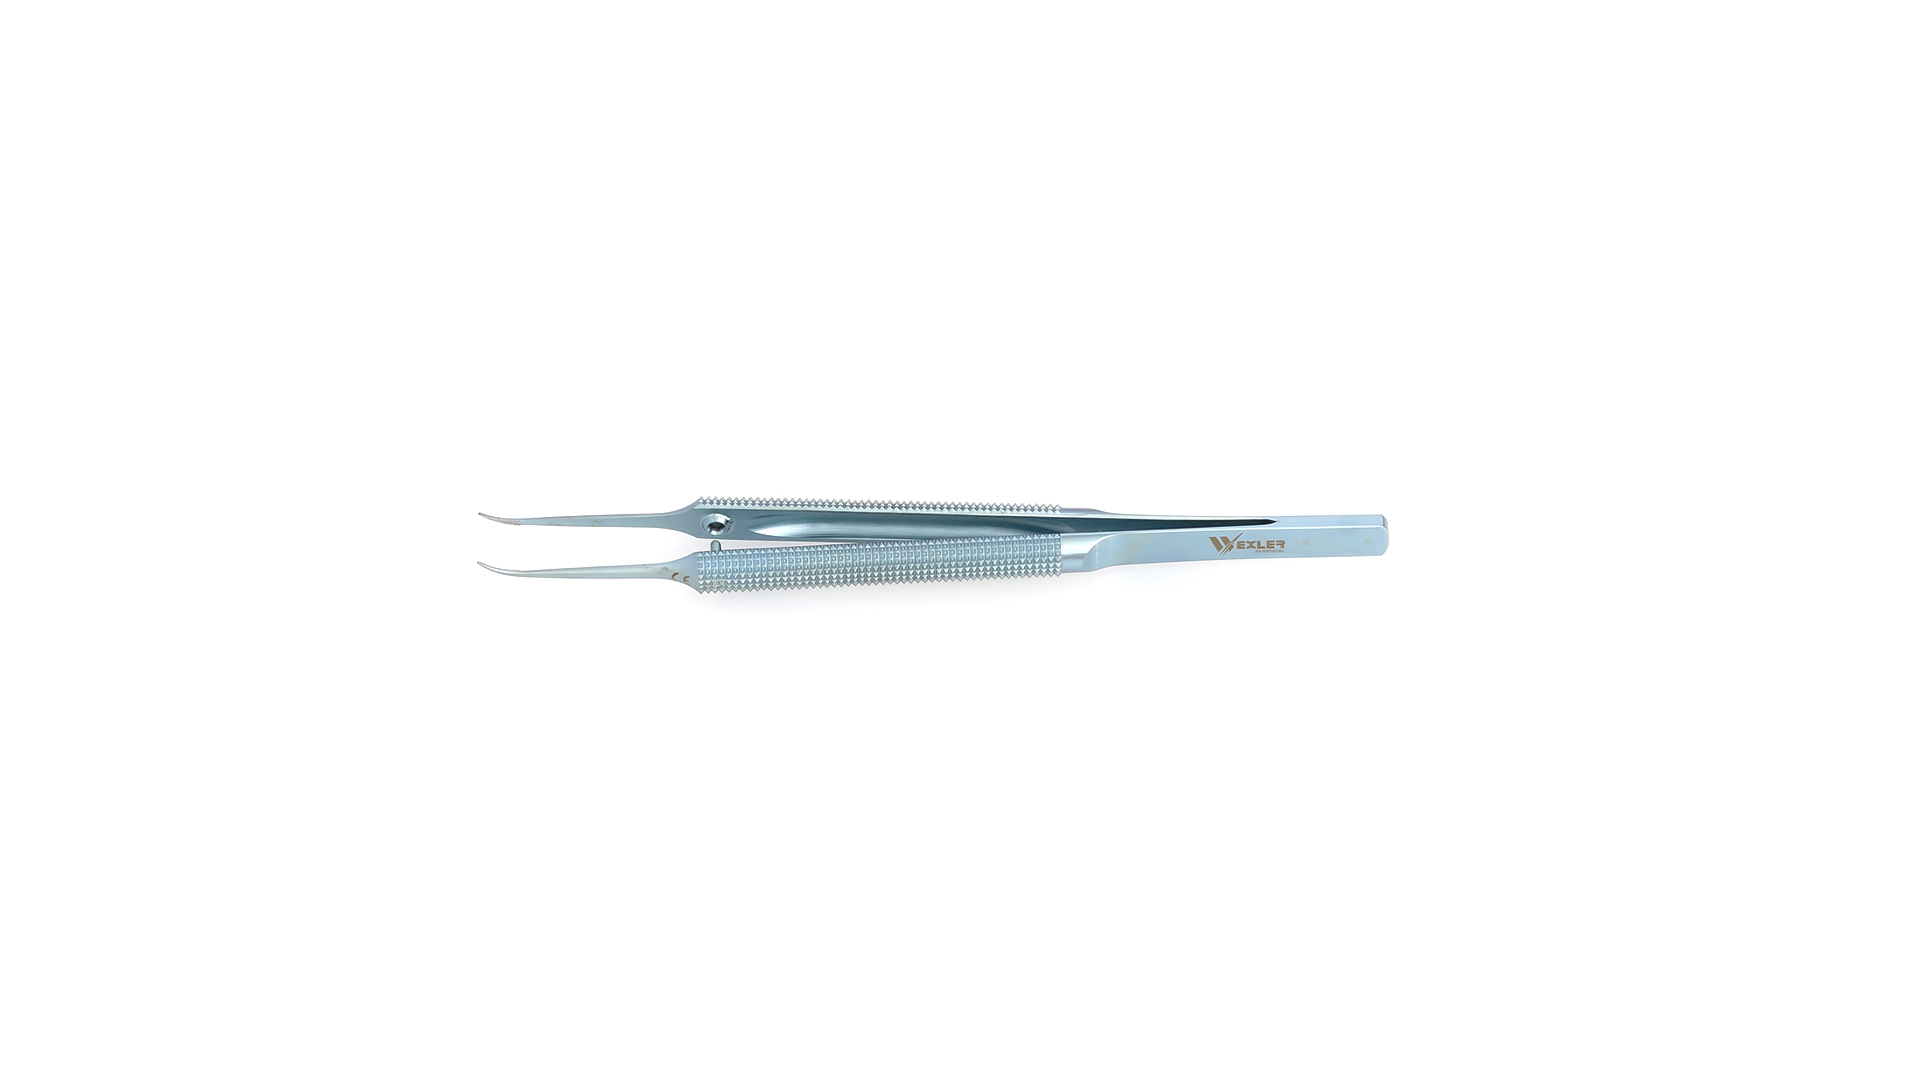 Micro Forceps - Curved 0.5mm tips w/TC coated tying platform